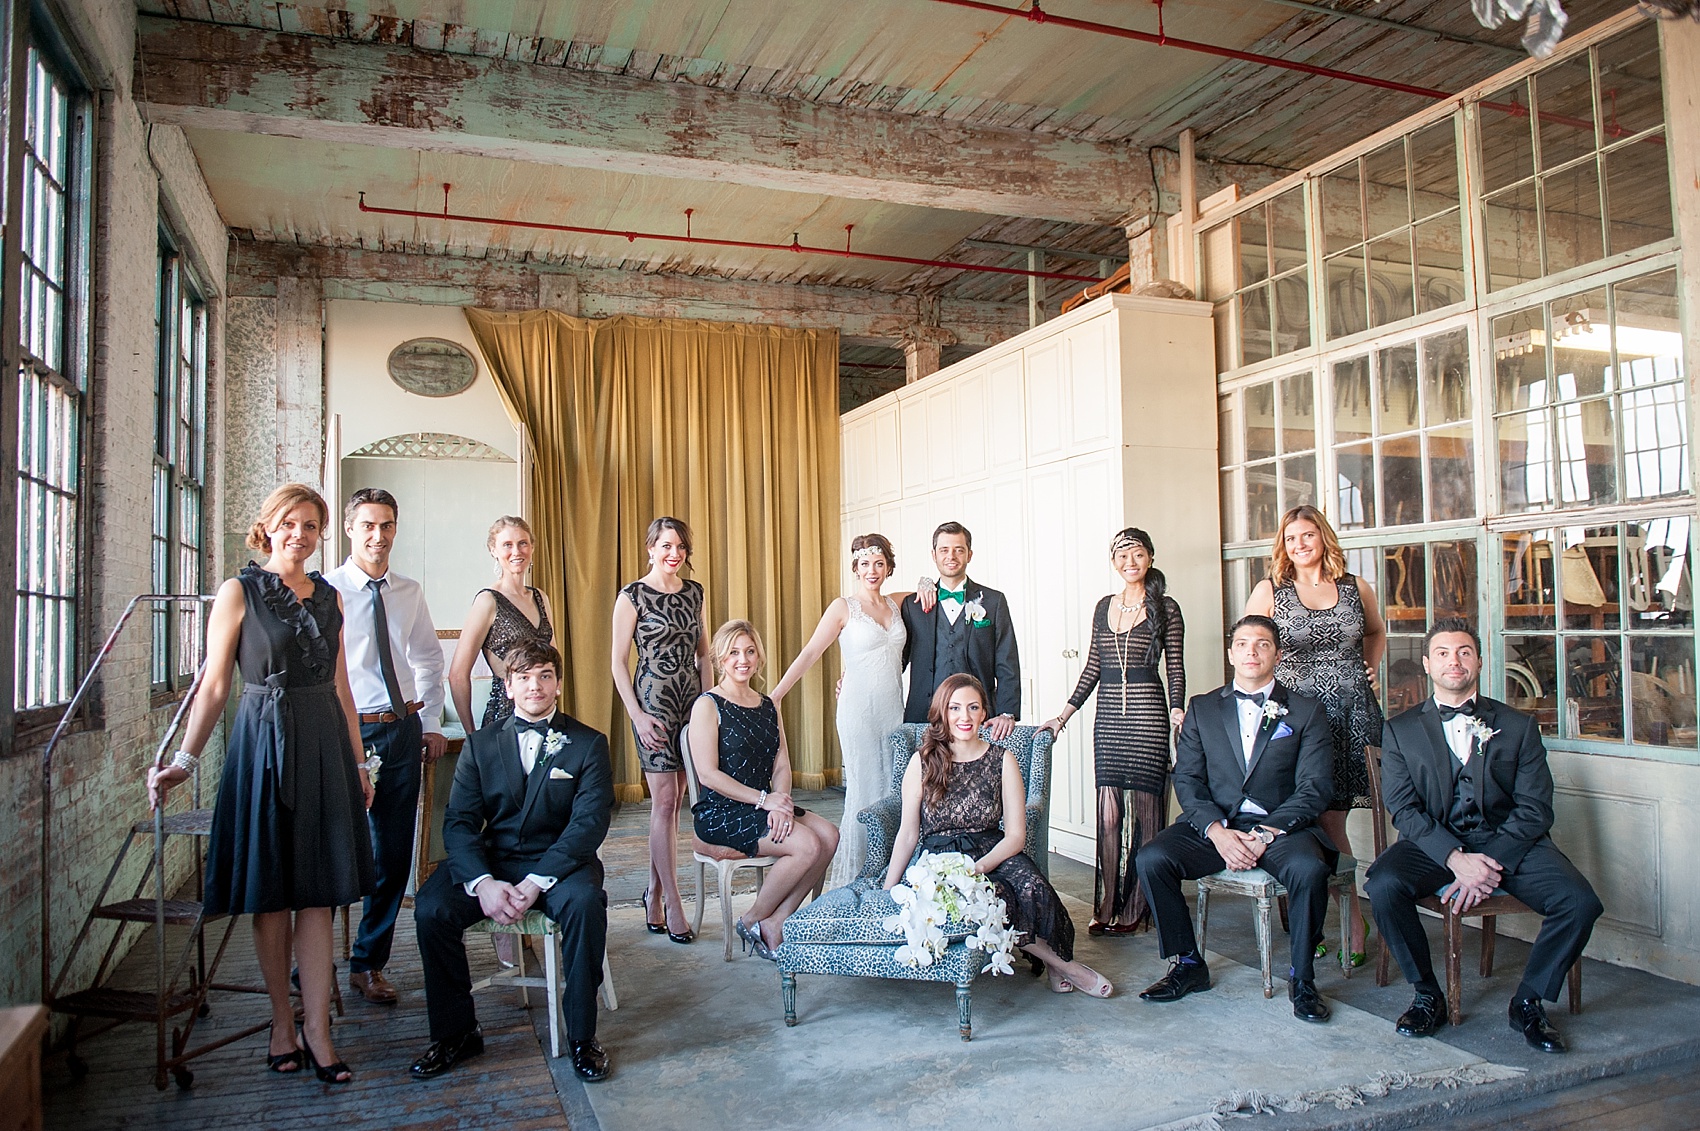 Wedding party portraits at the Metropolitan Building vintage 1920's wedding. Images by Mikkel Paige Photography.